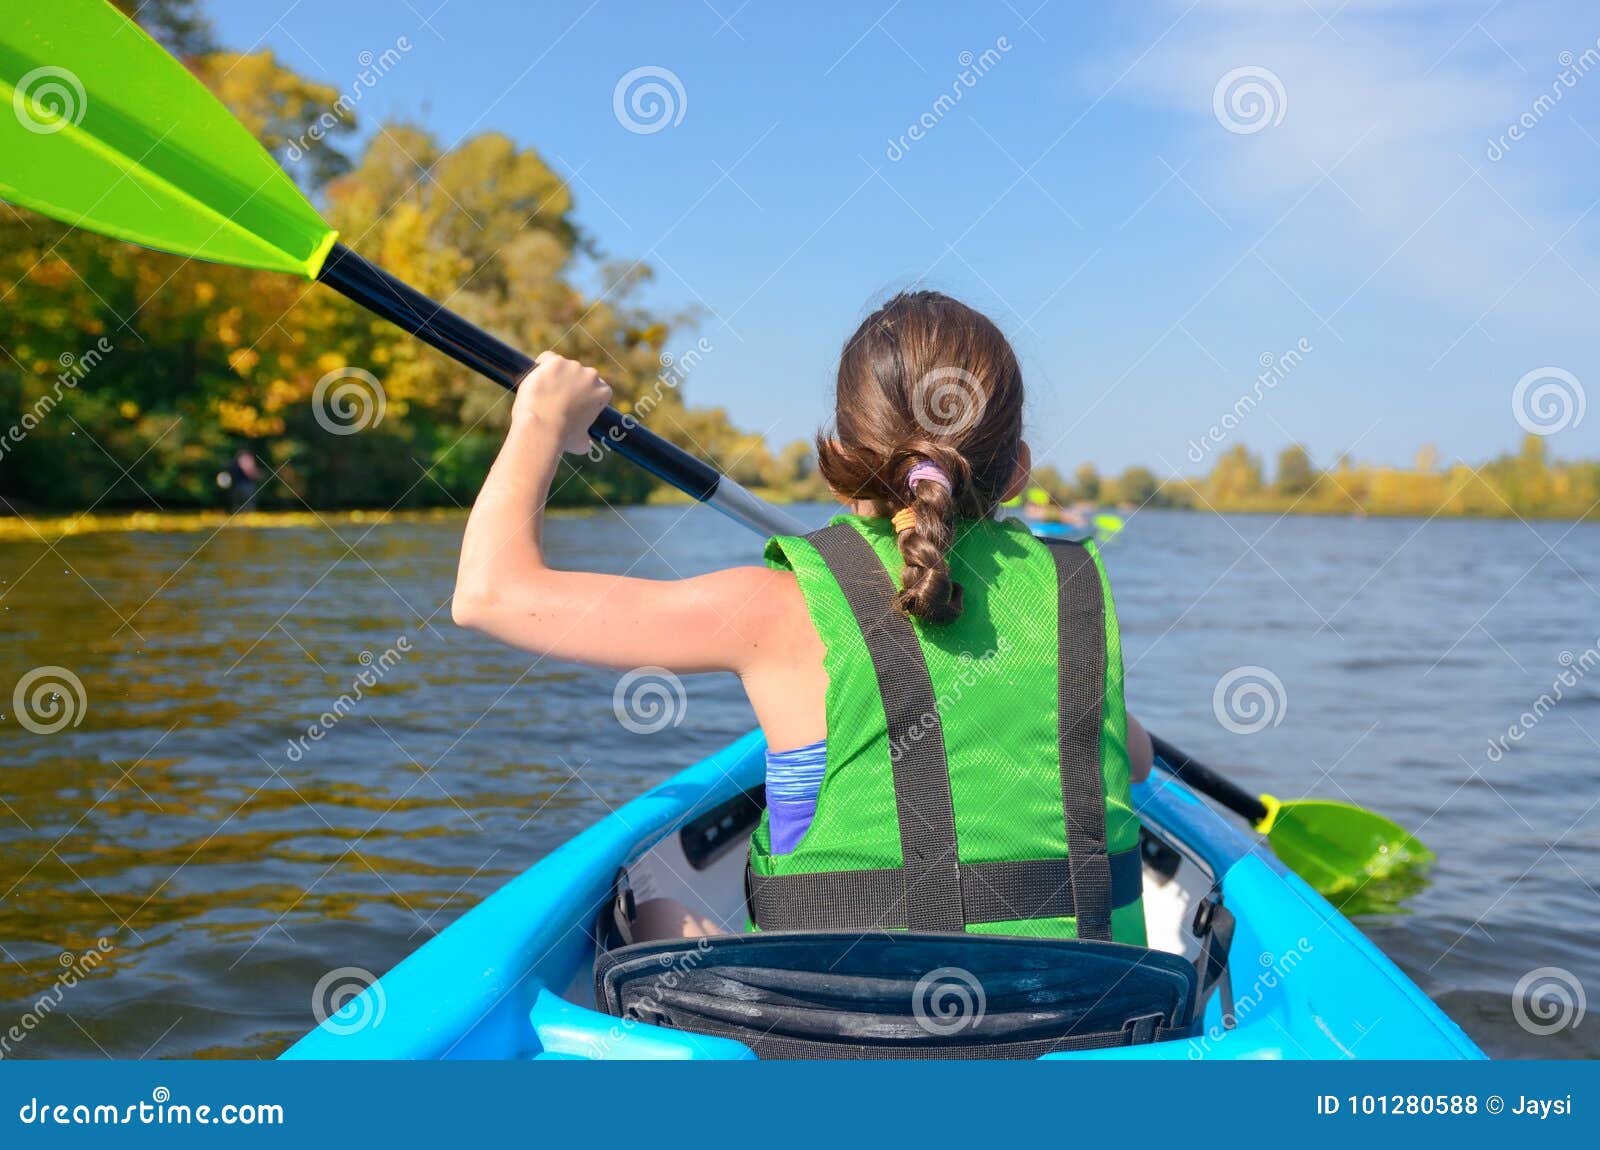 family kayaking, child paddling in kayak on river canoe tour, kid on active autumn weekend and vacation